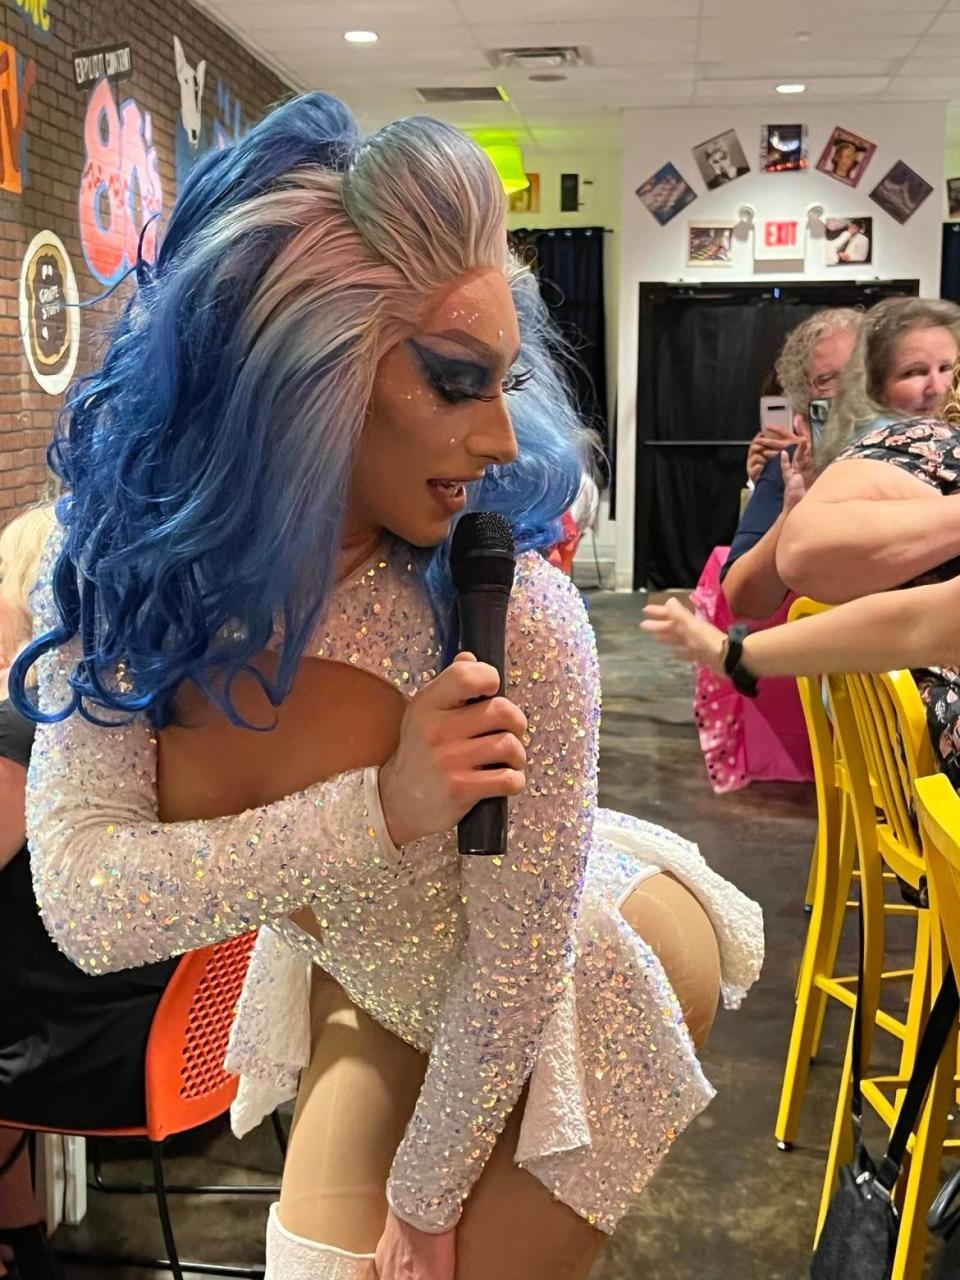 Anhedonia Delight acts playfully during drag bingo at That Pop Up Bar at Twisted Citrus restaurant in North Canton. Tickets are $10 and often sell out quickly online through Eventbrite. Tickets for fall drag bingo dates go on sale June 15.